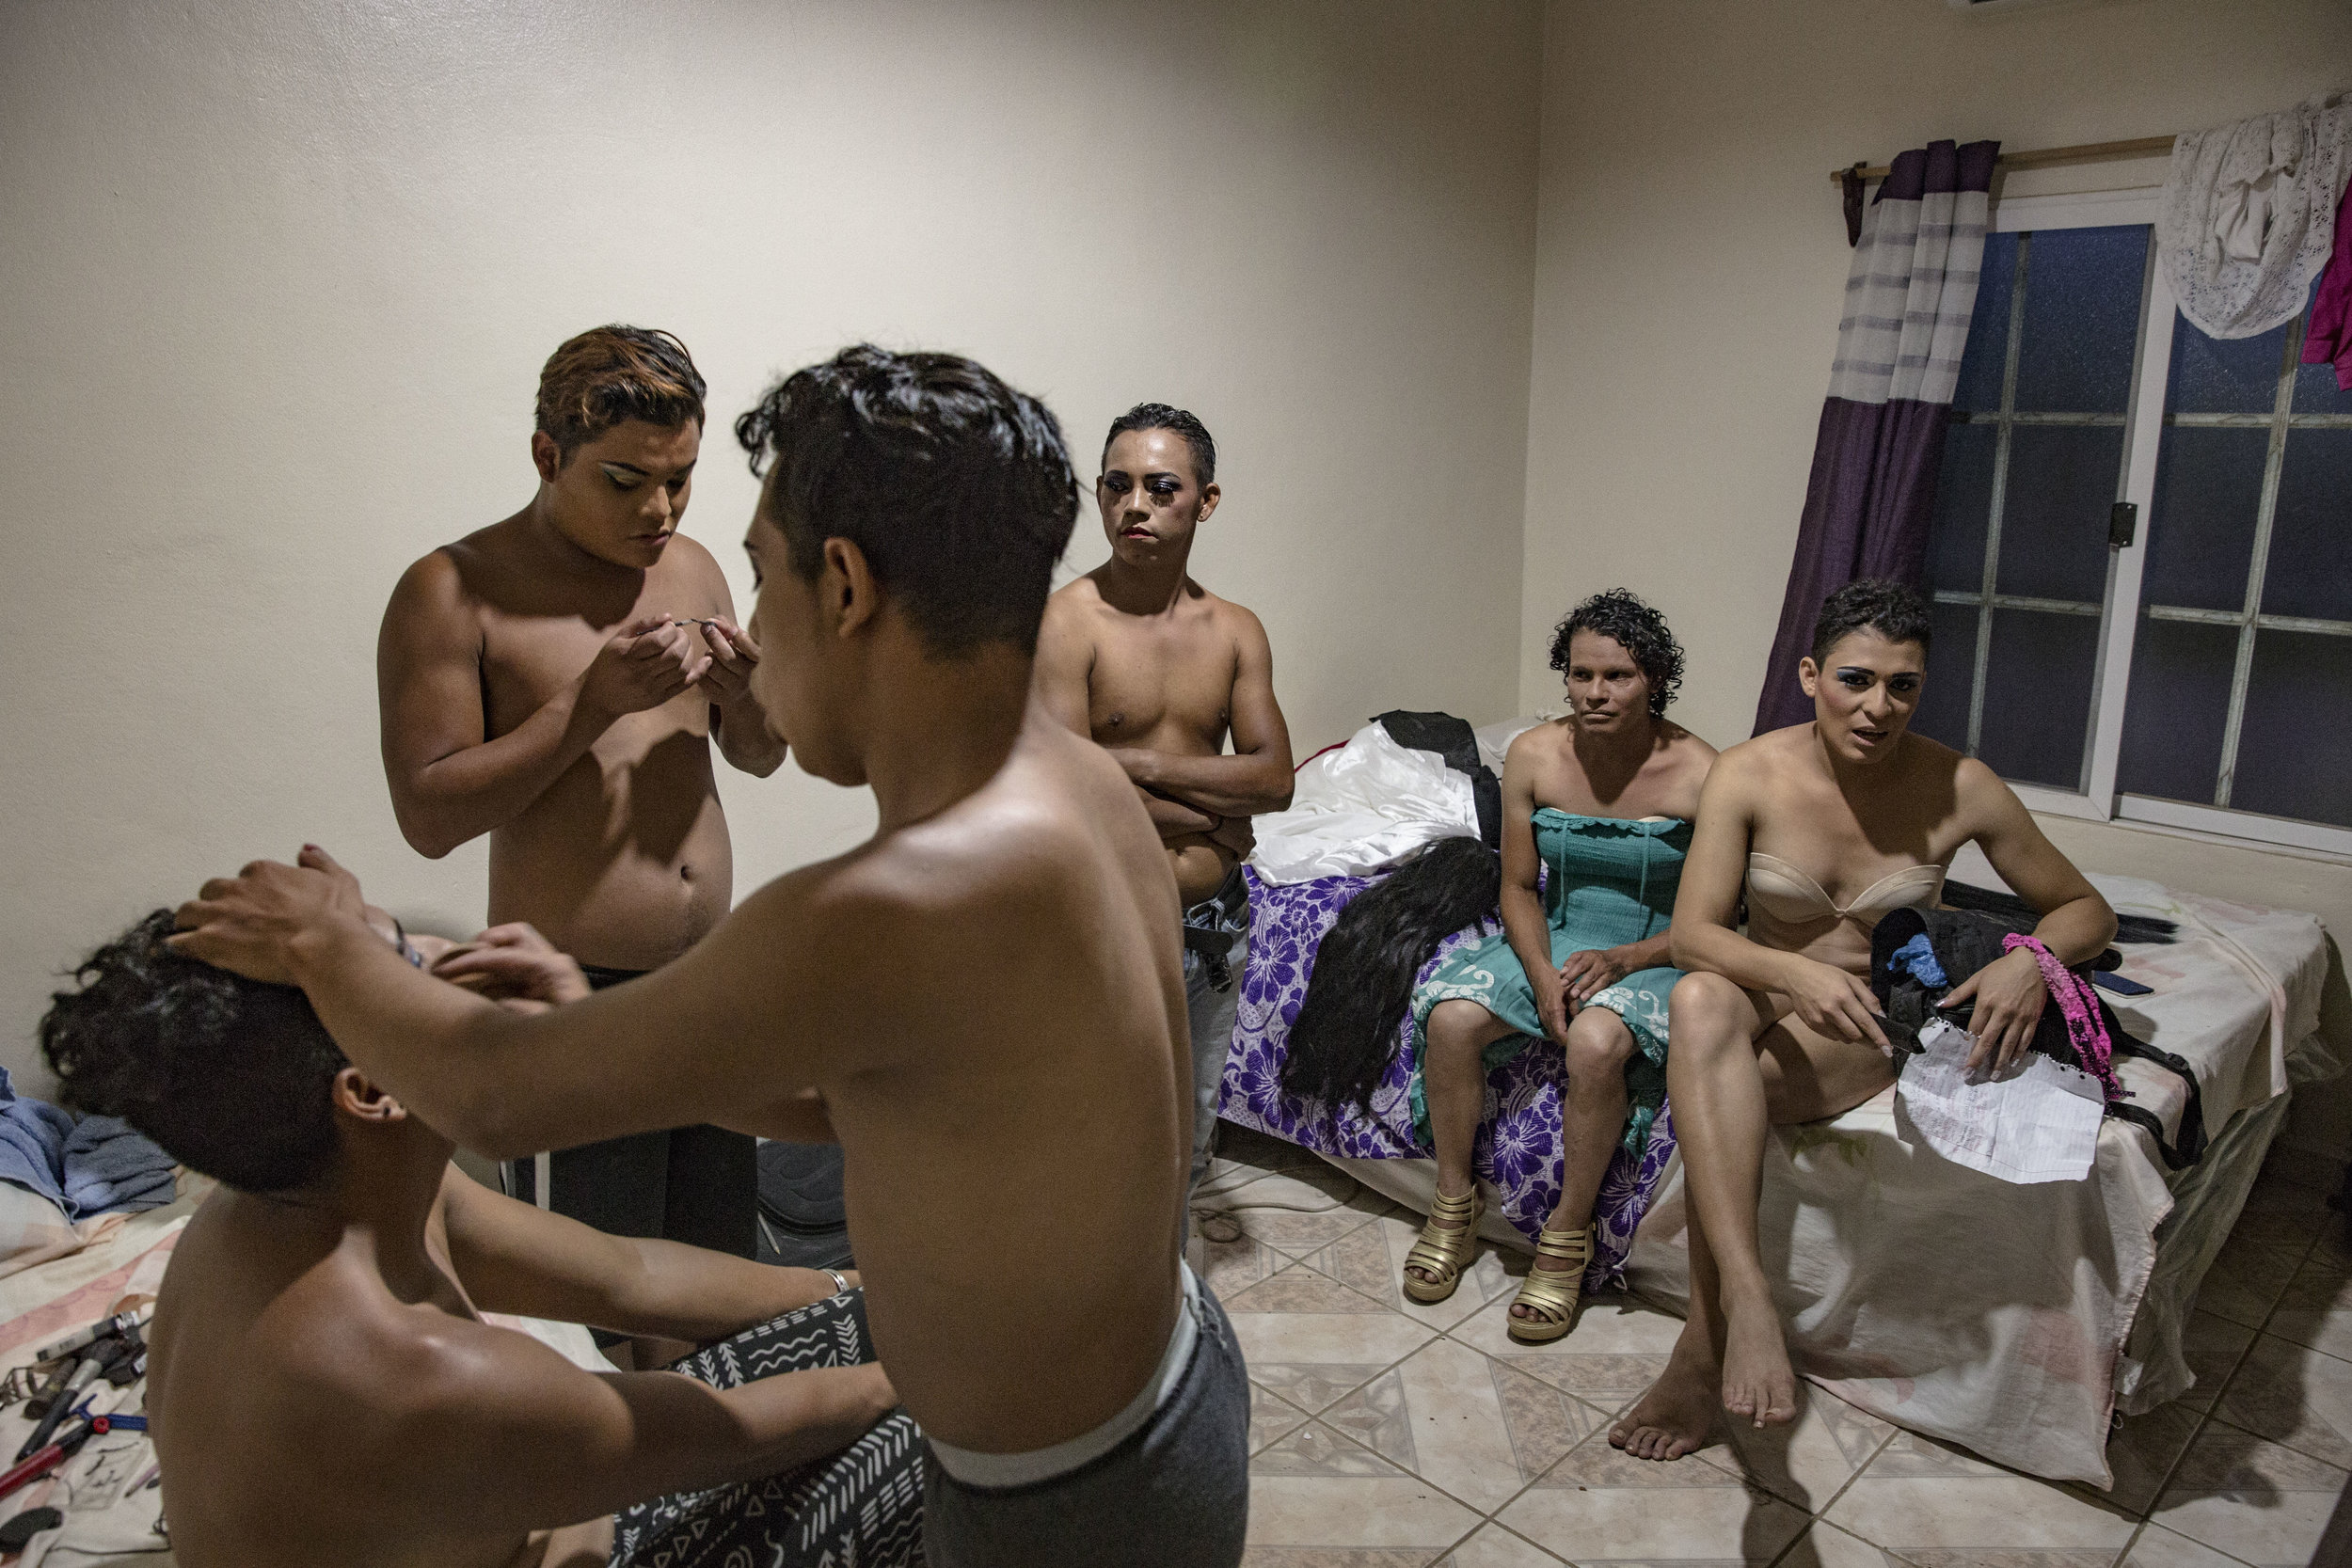  Darwin put make up onto other guys and friends, before a beauty contest for trans people in the small town of San Antonio de Cortez, in the north of Honduras. Darwin was very close to his brother. Marco was his best friend and he represented a guide